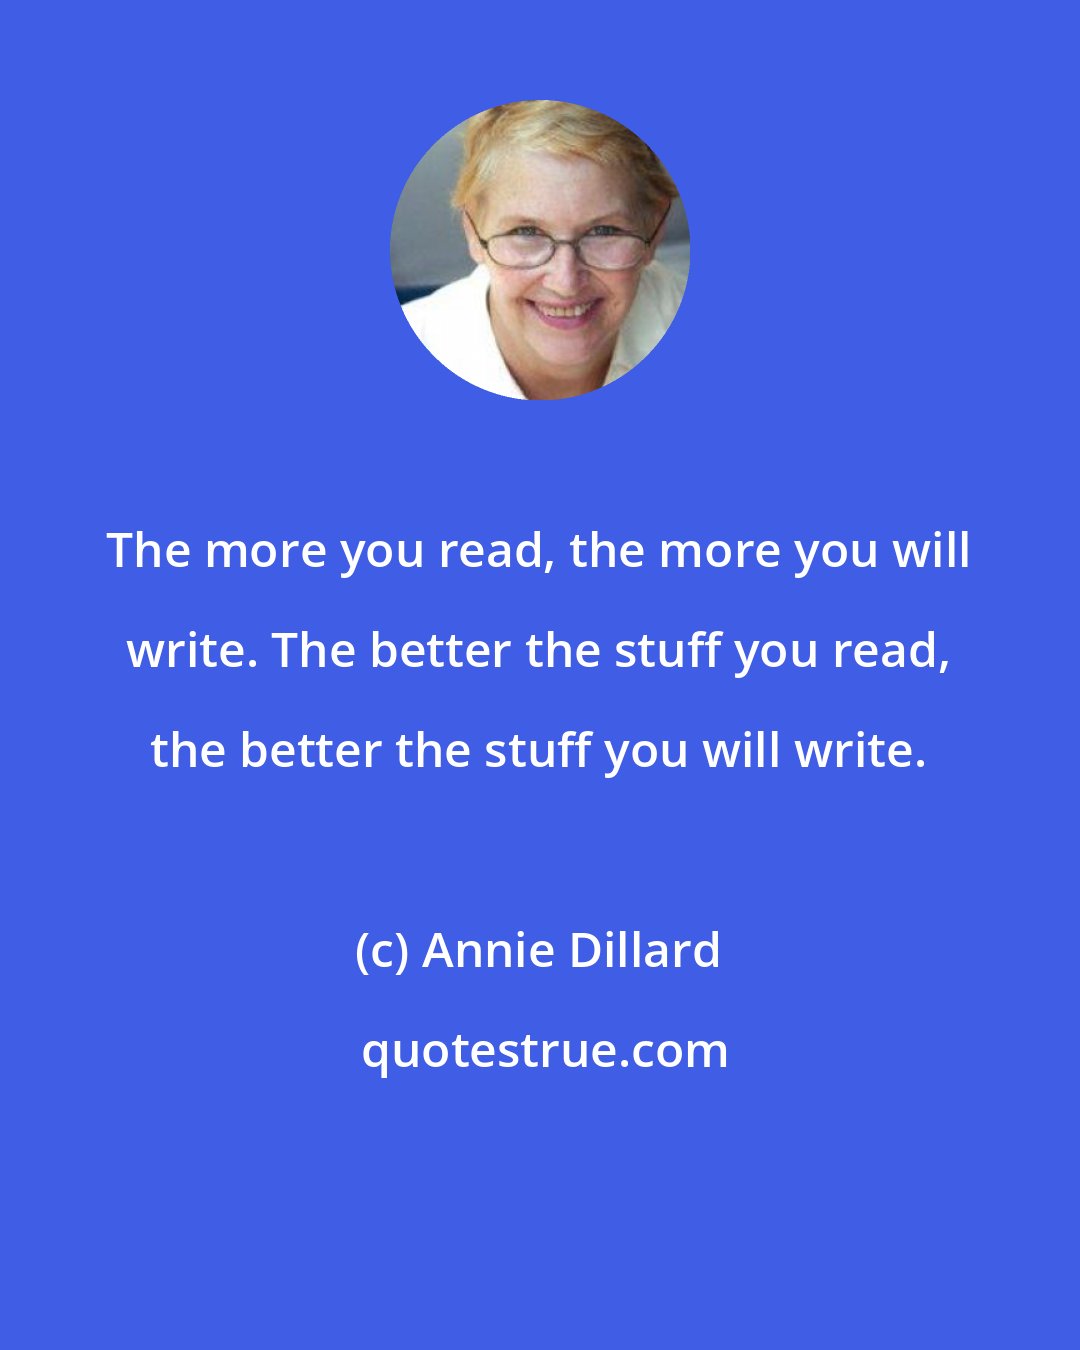 Annie Dillard: The more you read, the more you will write. The better the stuff you read, the better the stuff you will write.